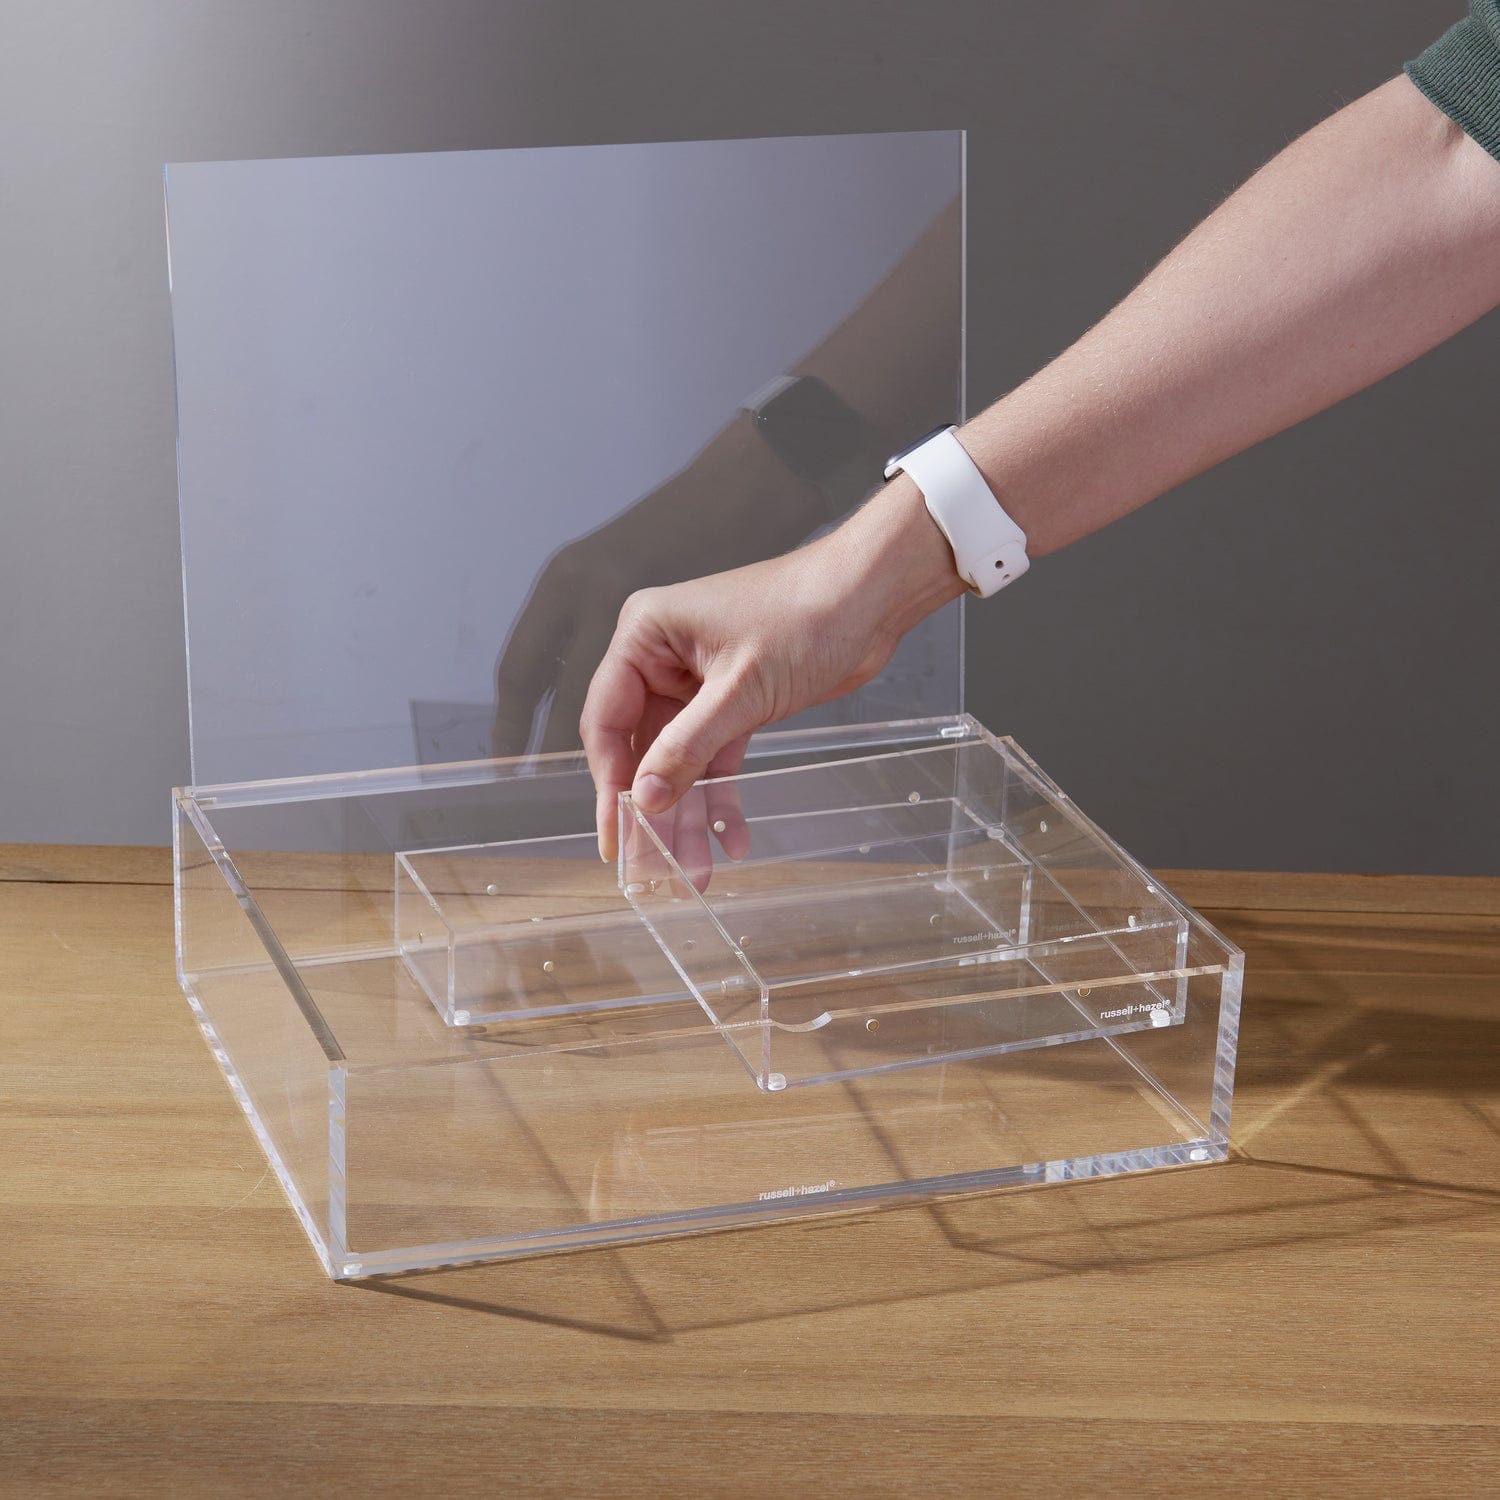 Hammont Clear Acrylic Boxes 12 Pack 3.5X3.5X2.5